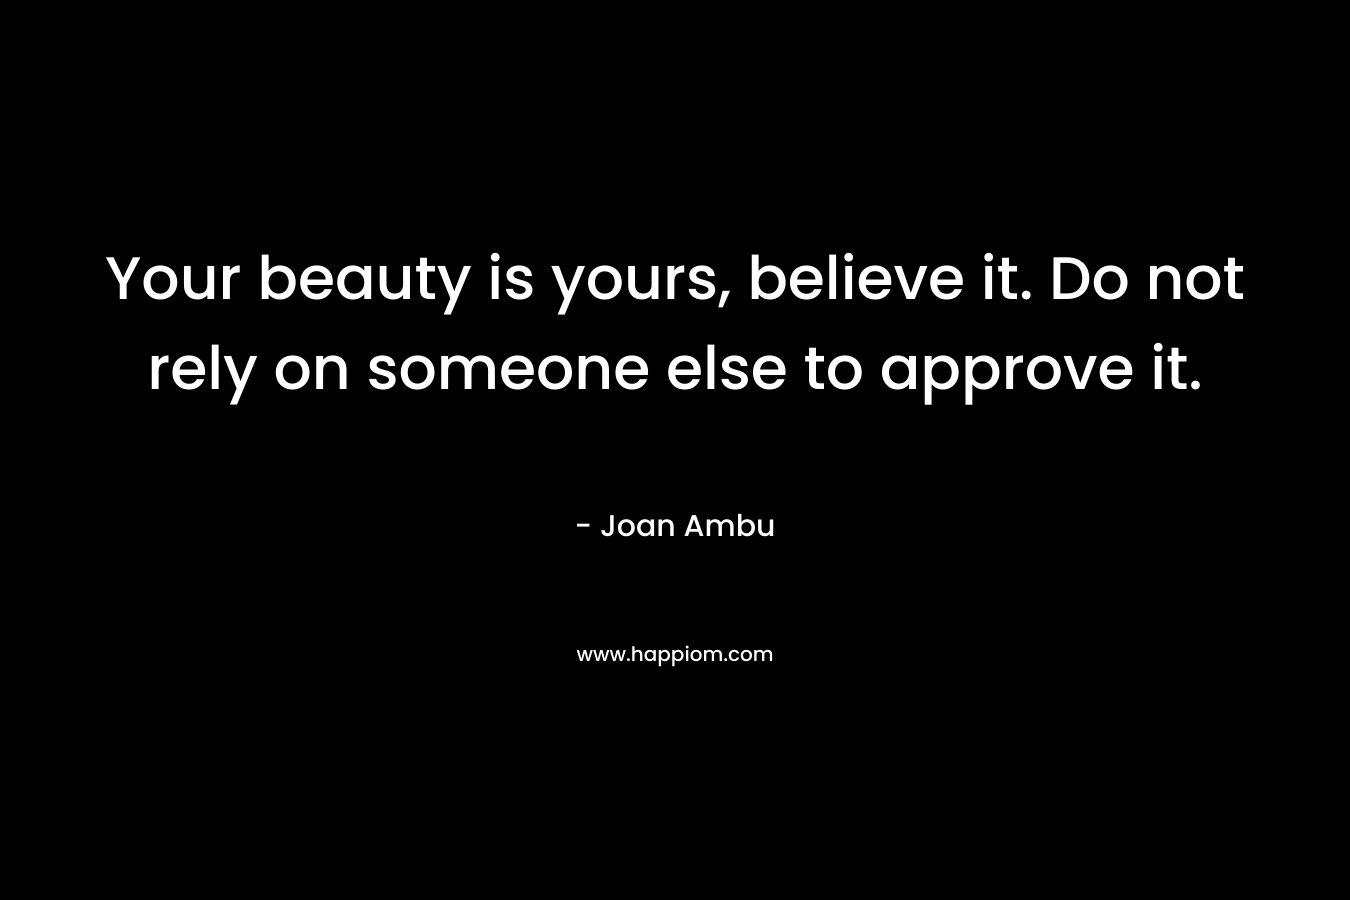 Your beauty is yours, believe it. Do not rely on someone else to approve it.